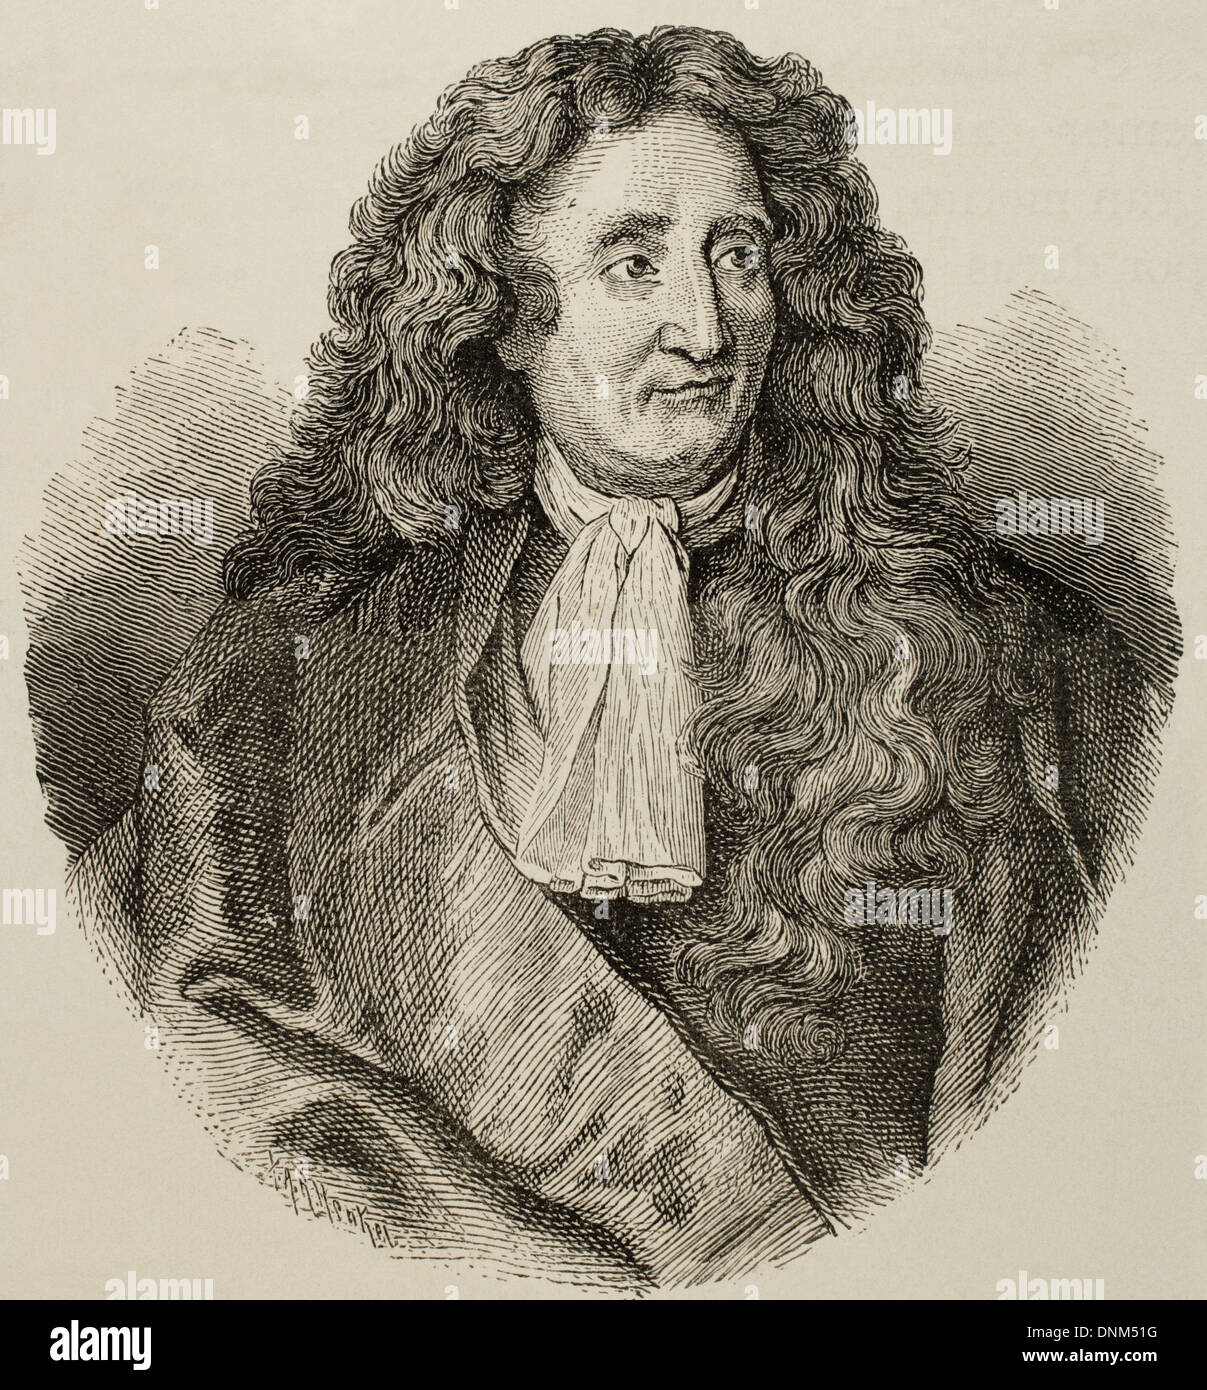 Jean de la Fontaine (1621-1695). French fabulist. Engraving in History of France, 1881. Stock Photo